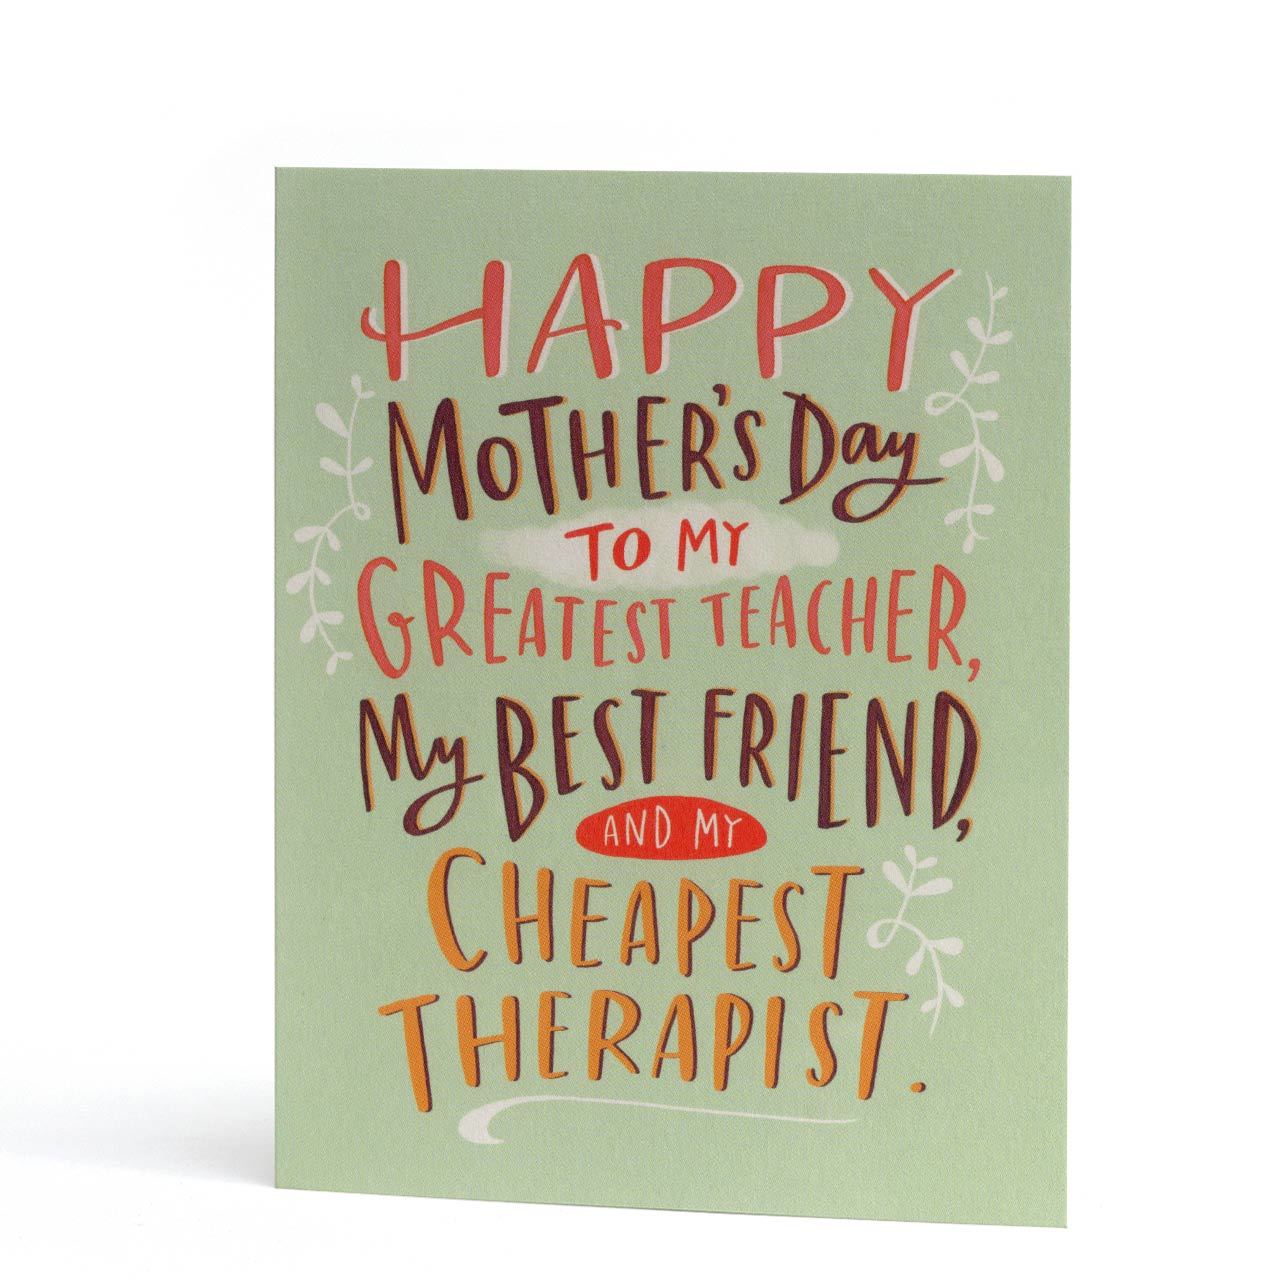 Cheapest Therapist Mother's Day Greeting Card